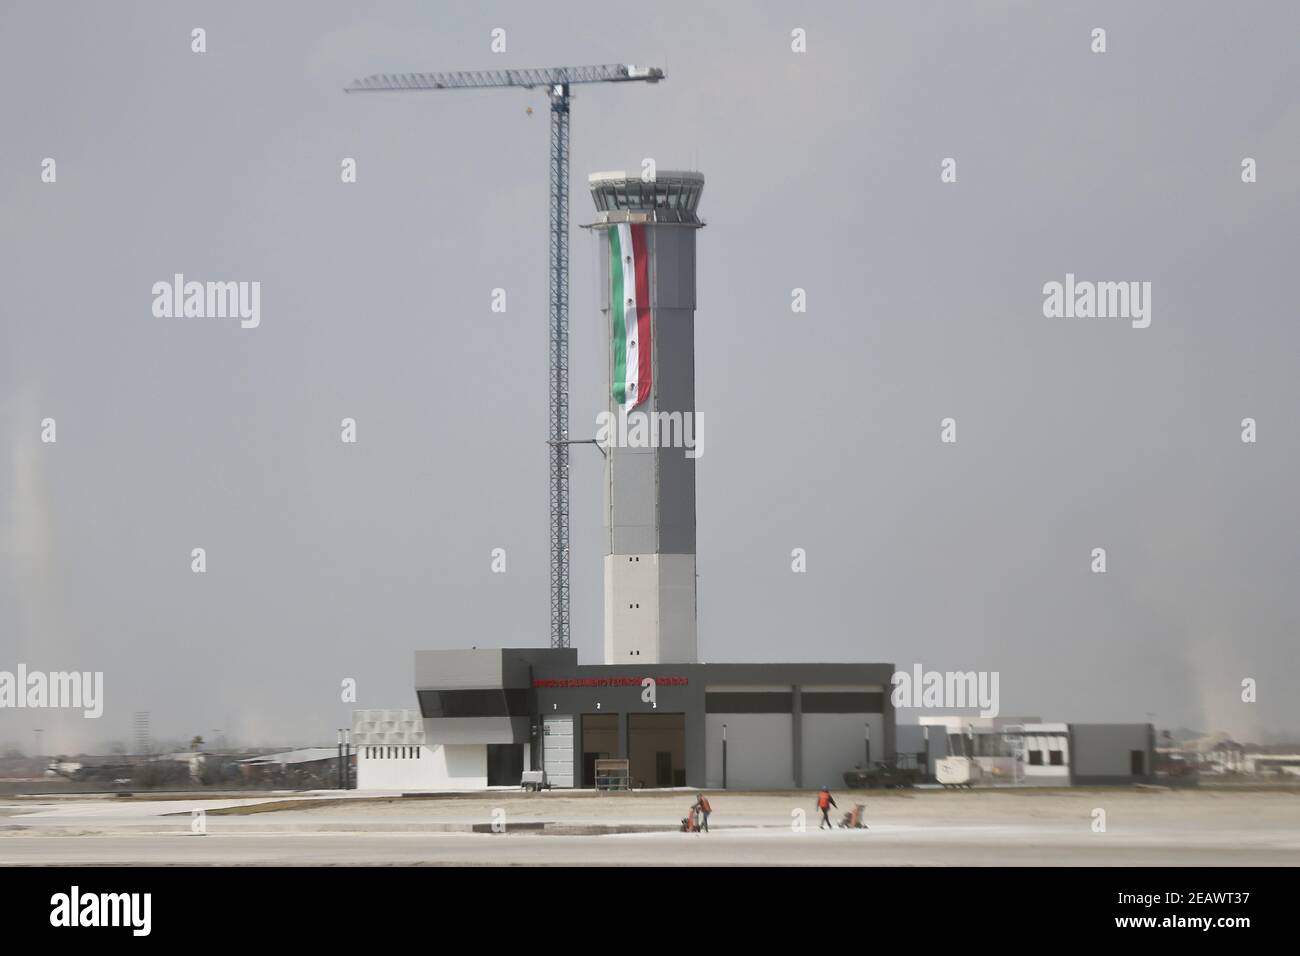 The control tower of the new international airport in Zumpango de Ocampo is pictured, at the Santa Lucia military airbase on the outskirts of Mexico City, Mexico February 10, 2021. REUTERS/Edgard Garrido Stock Photo